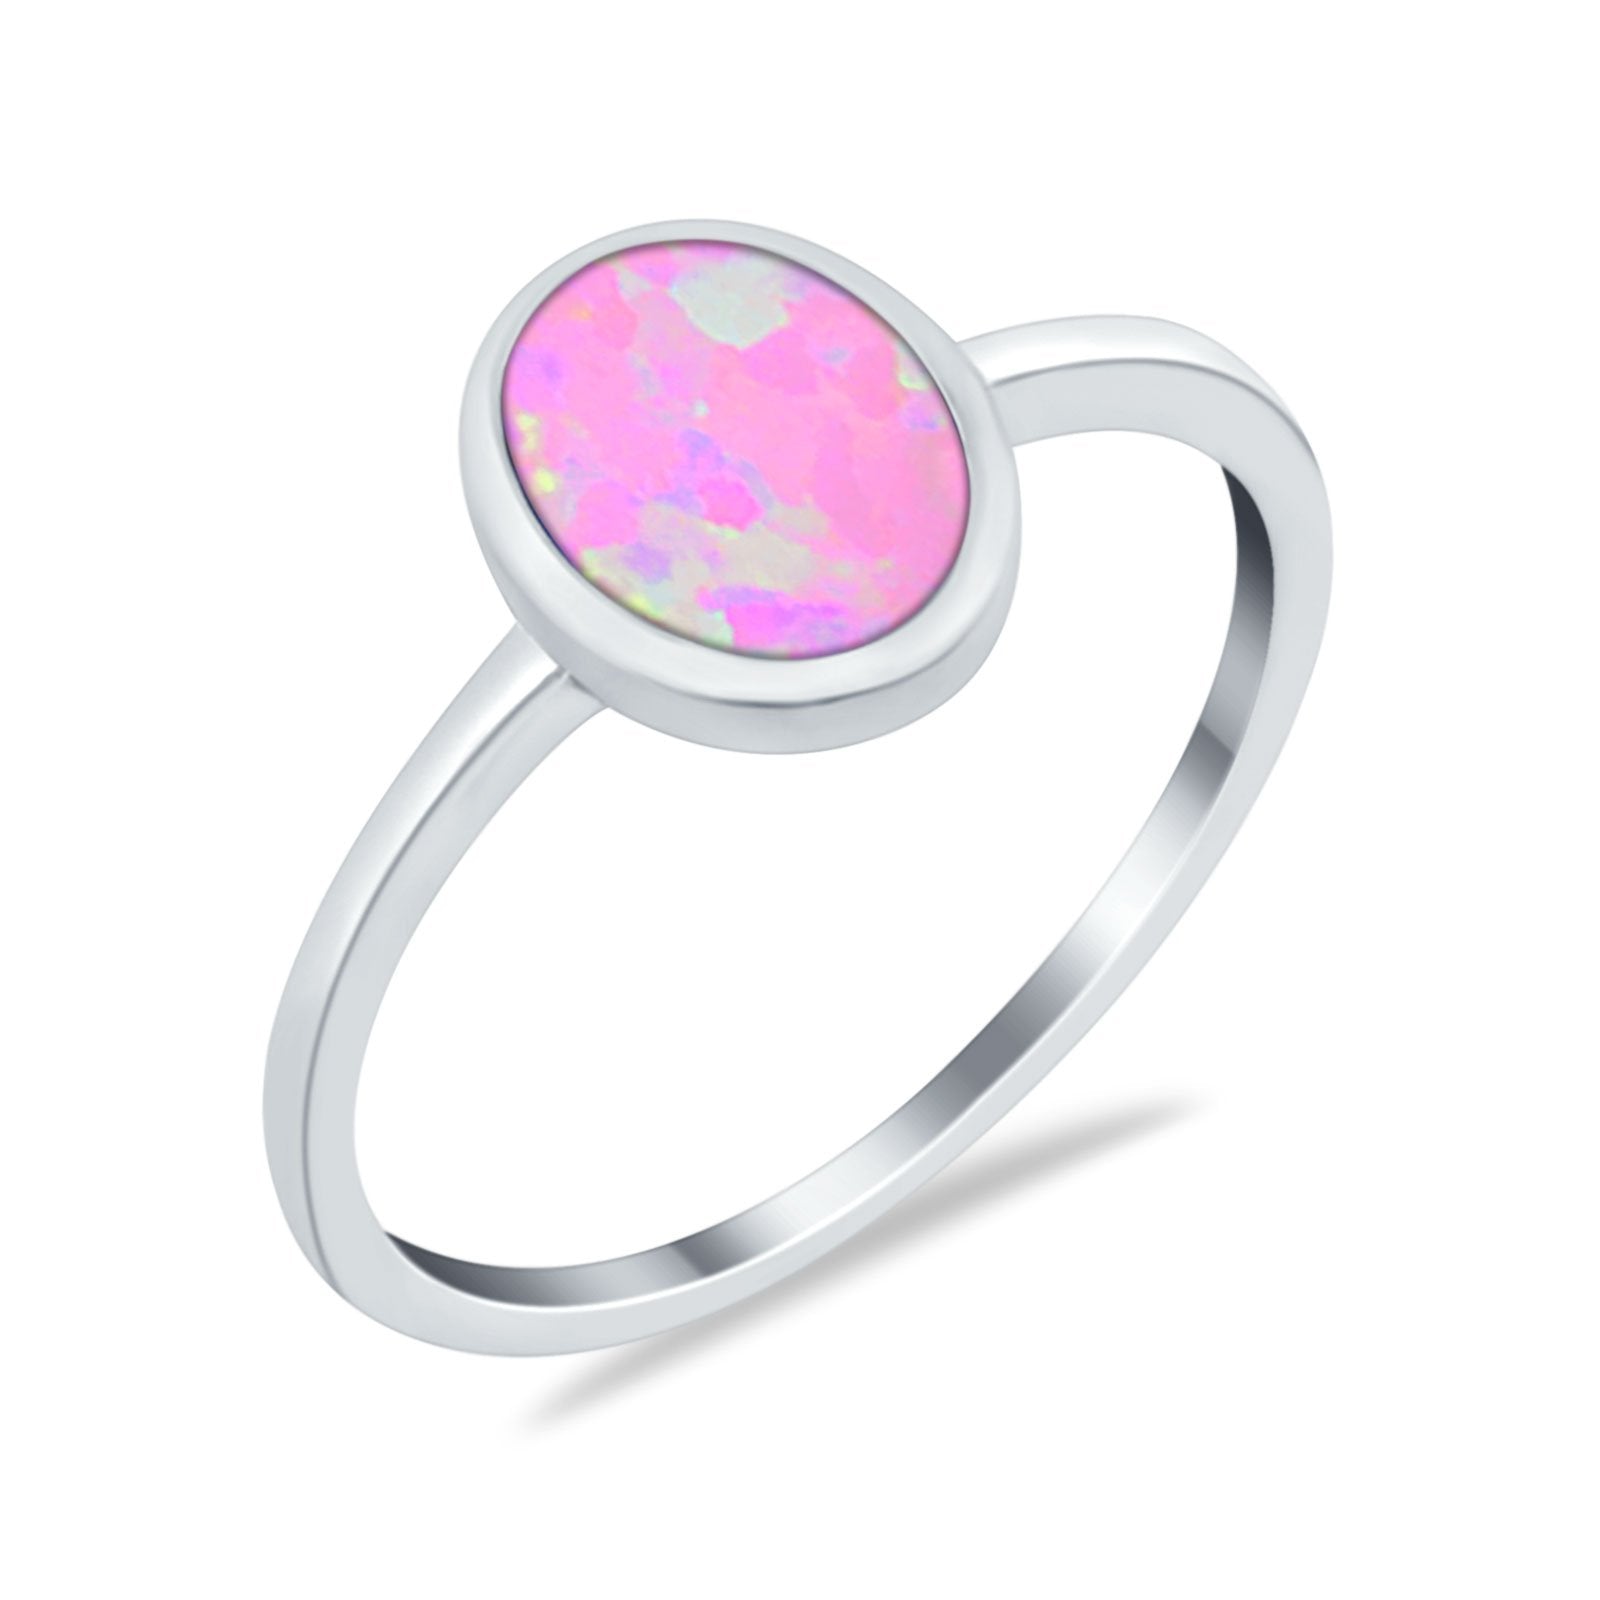 Solitaire Oval Thumb Ring Lab Created Pink Opal Stone 925 Sterling Silver